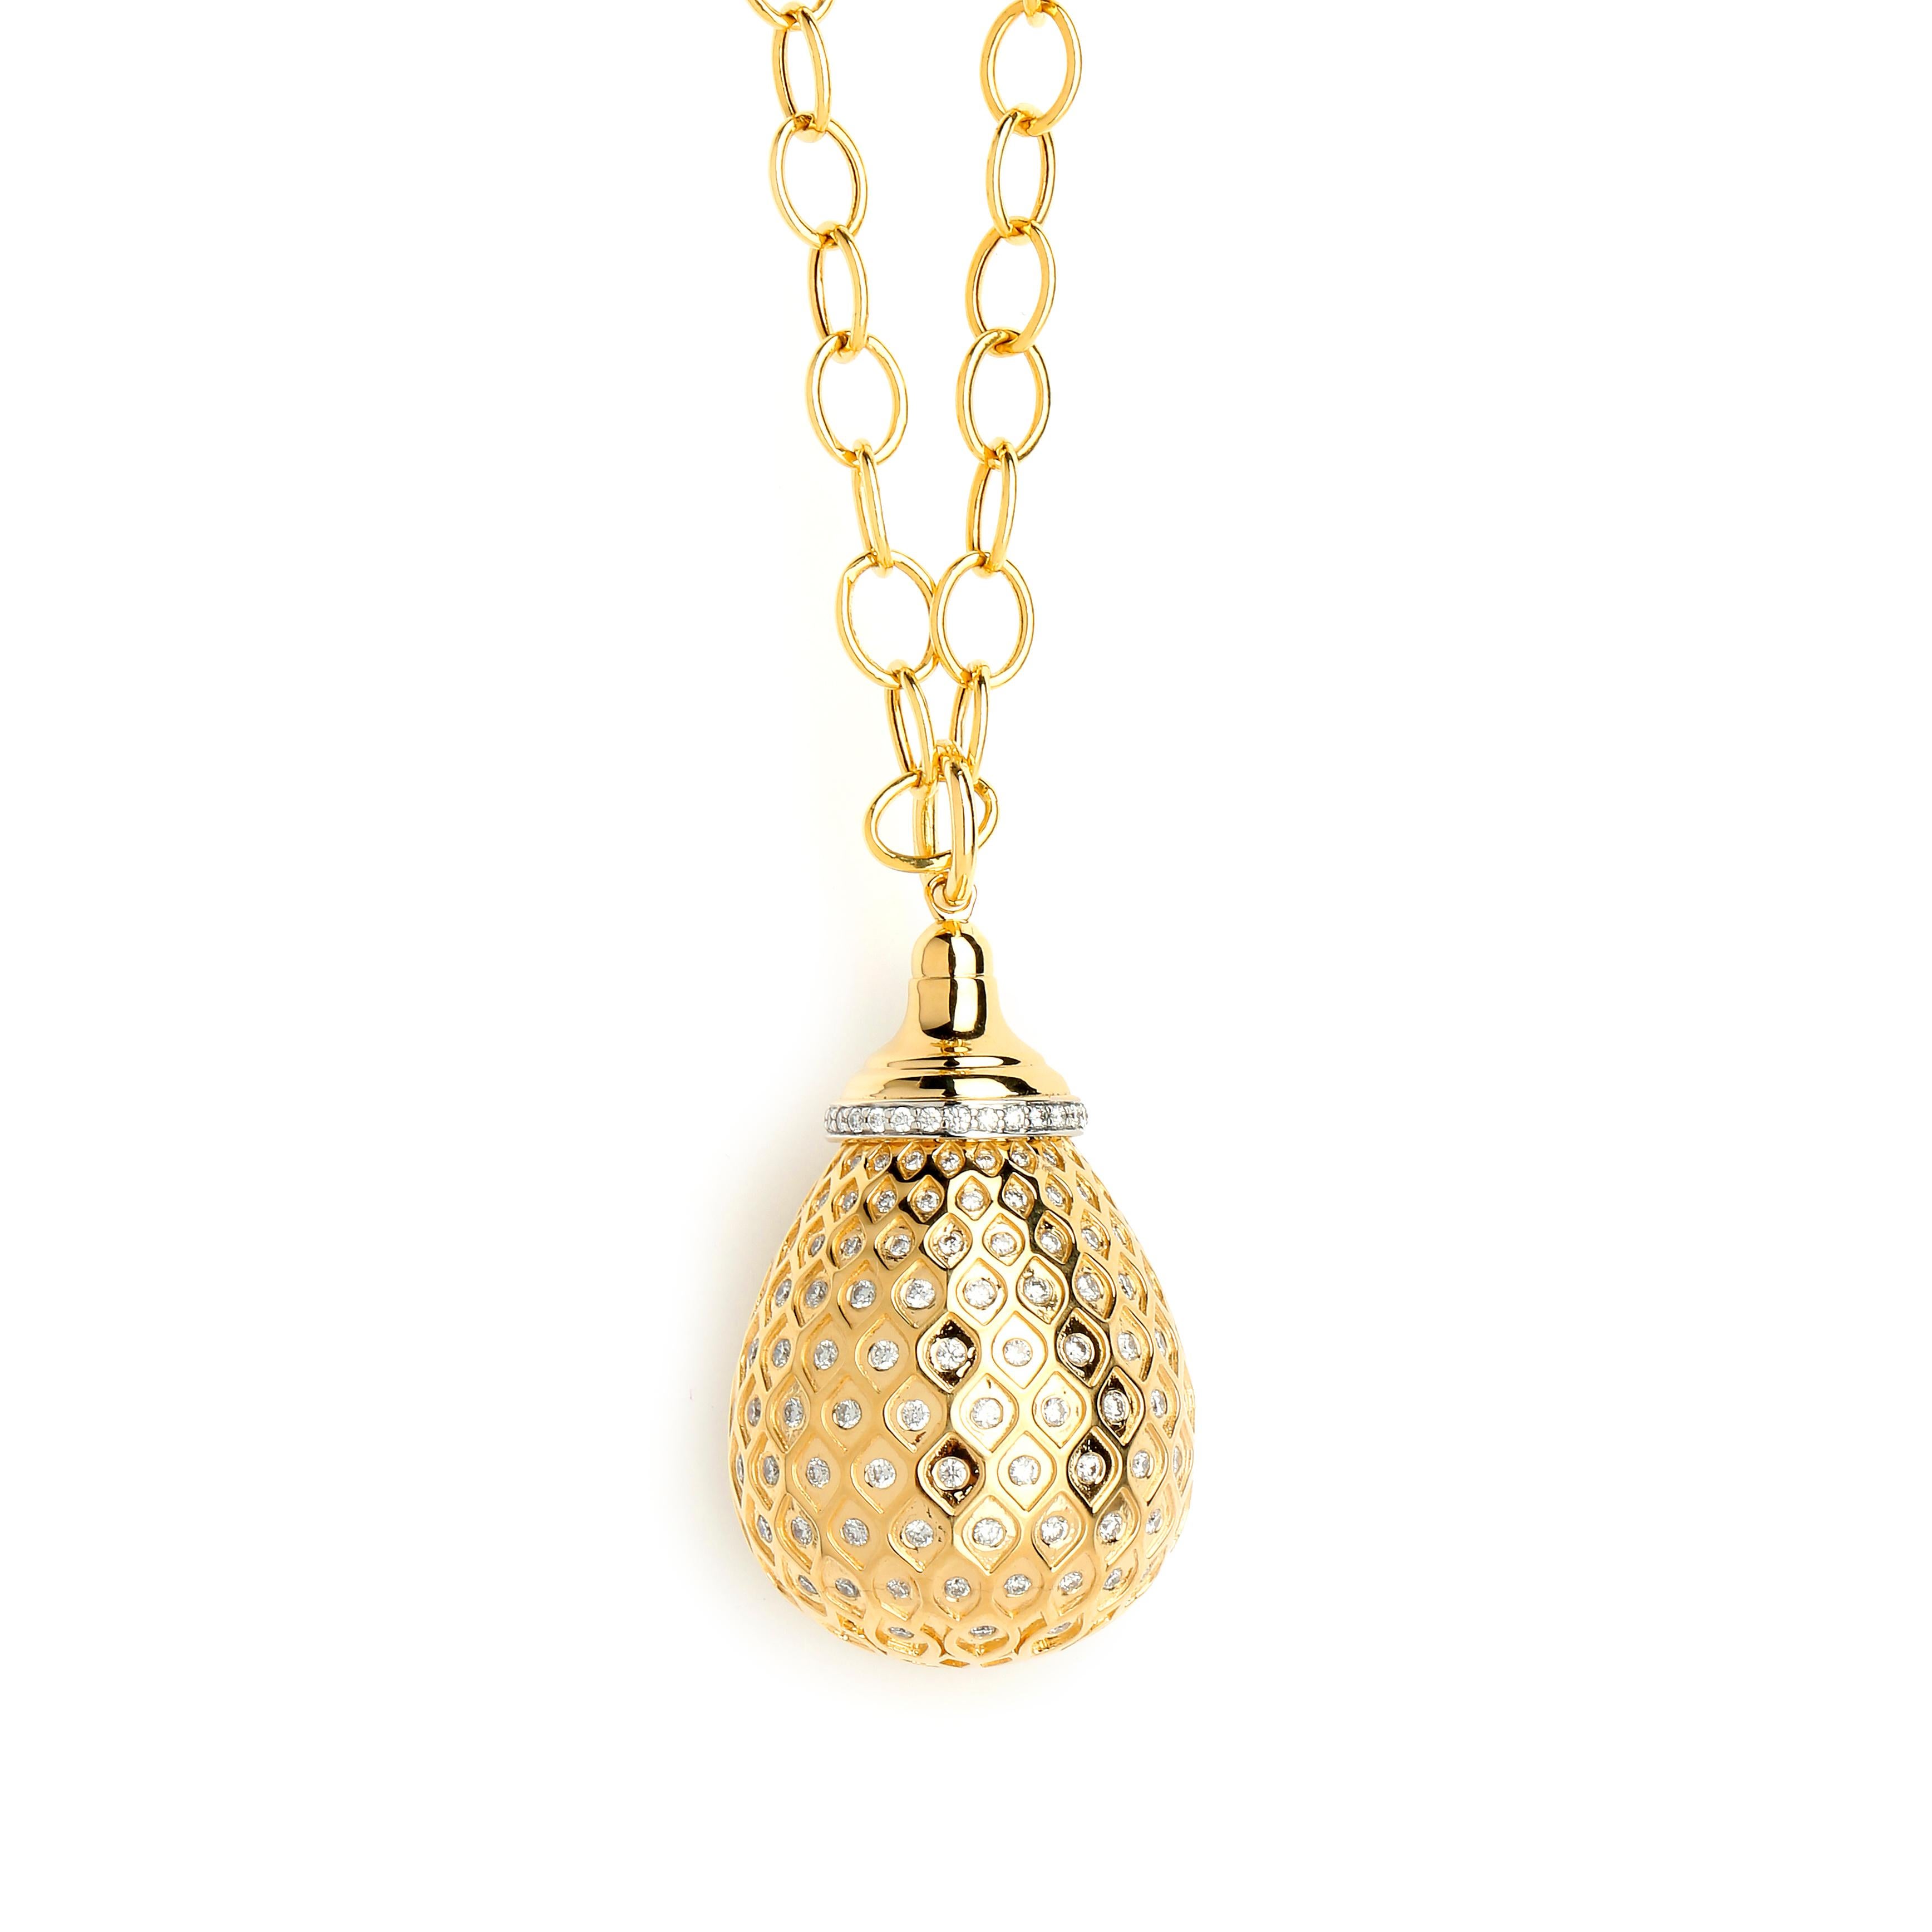 Created in 18 karat yellow gold 
Diamonds 1.65 cts approx
Limited edition 
Chain sold separately

Envisioned in luxurious 18 karat yellow gold, this limited edition pendant glistens with diamonds totaling 1.65 carats, apprx. The elegant chain is